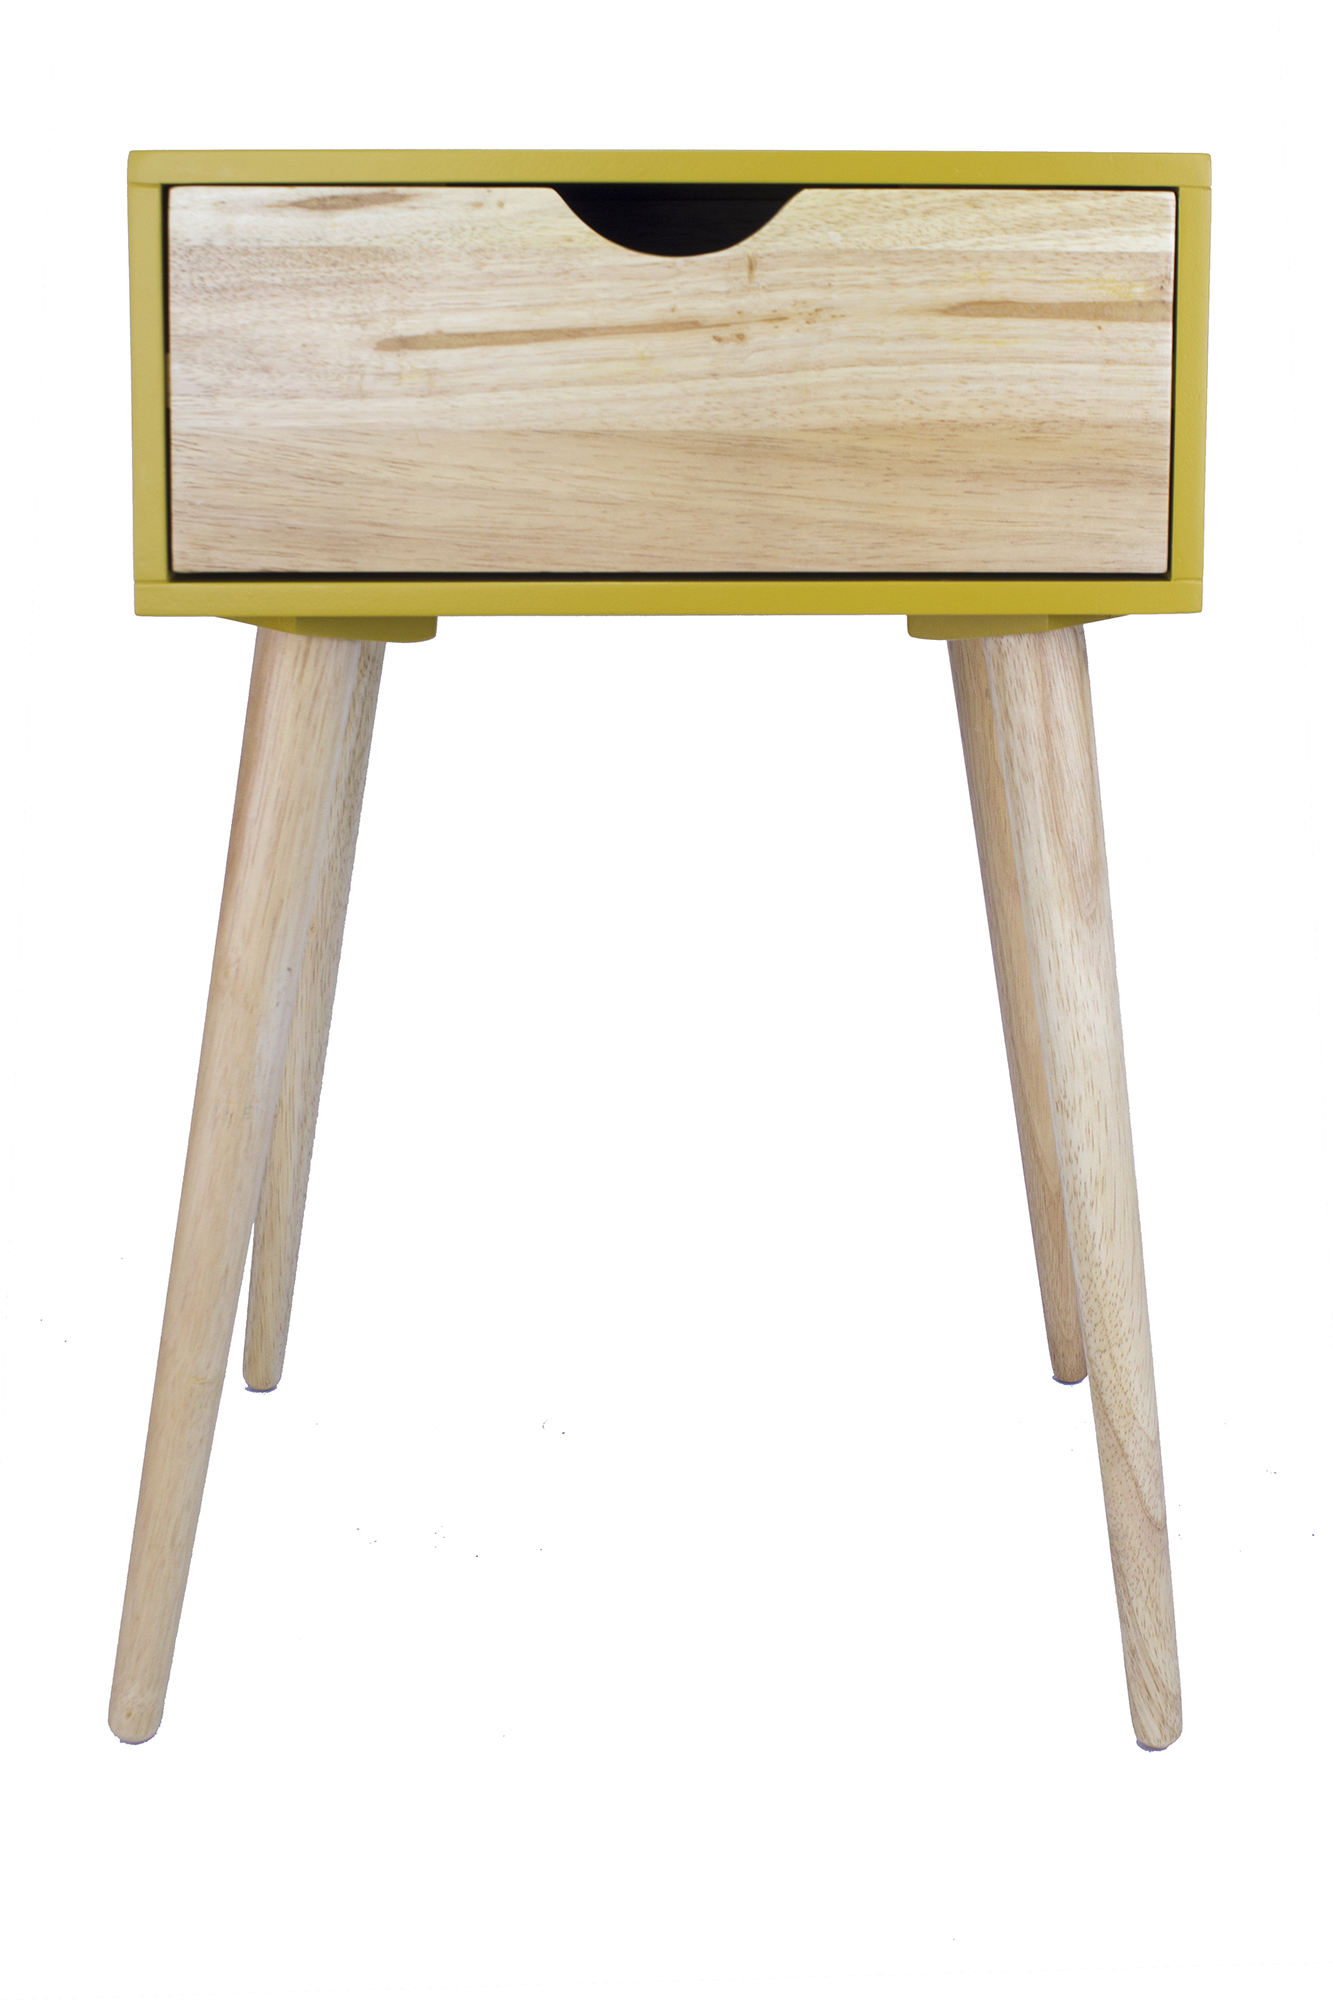 16" X 12" X 24" Yellow MDF Wood End Table with Drawer